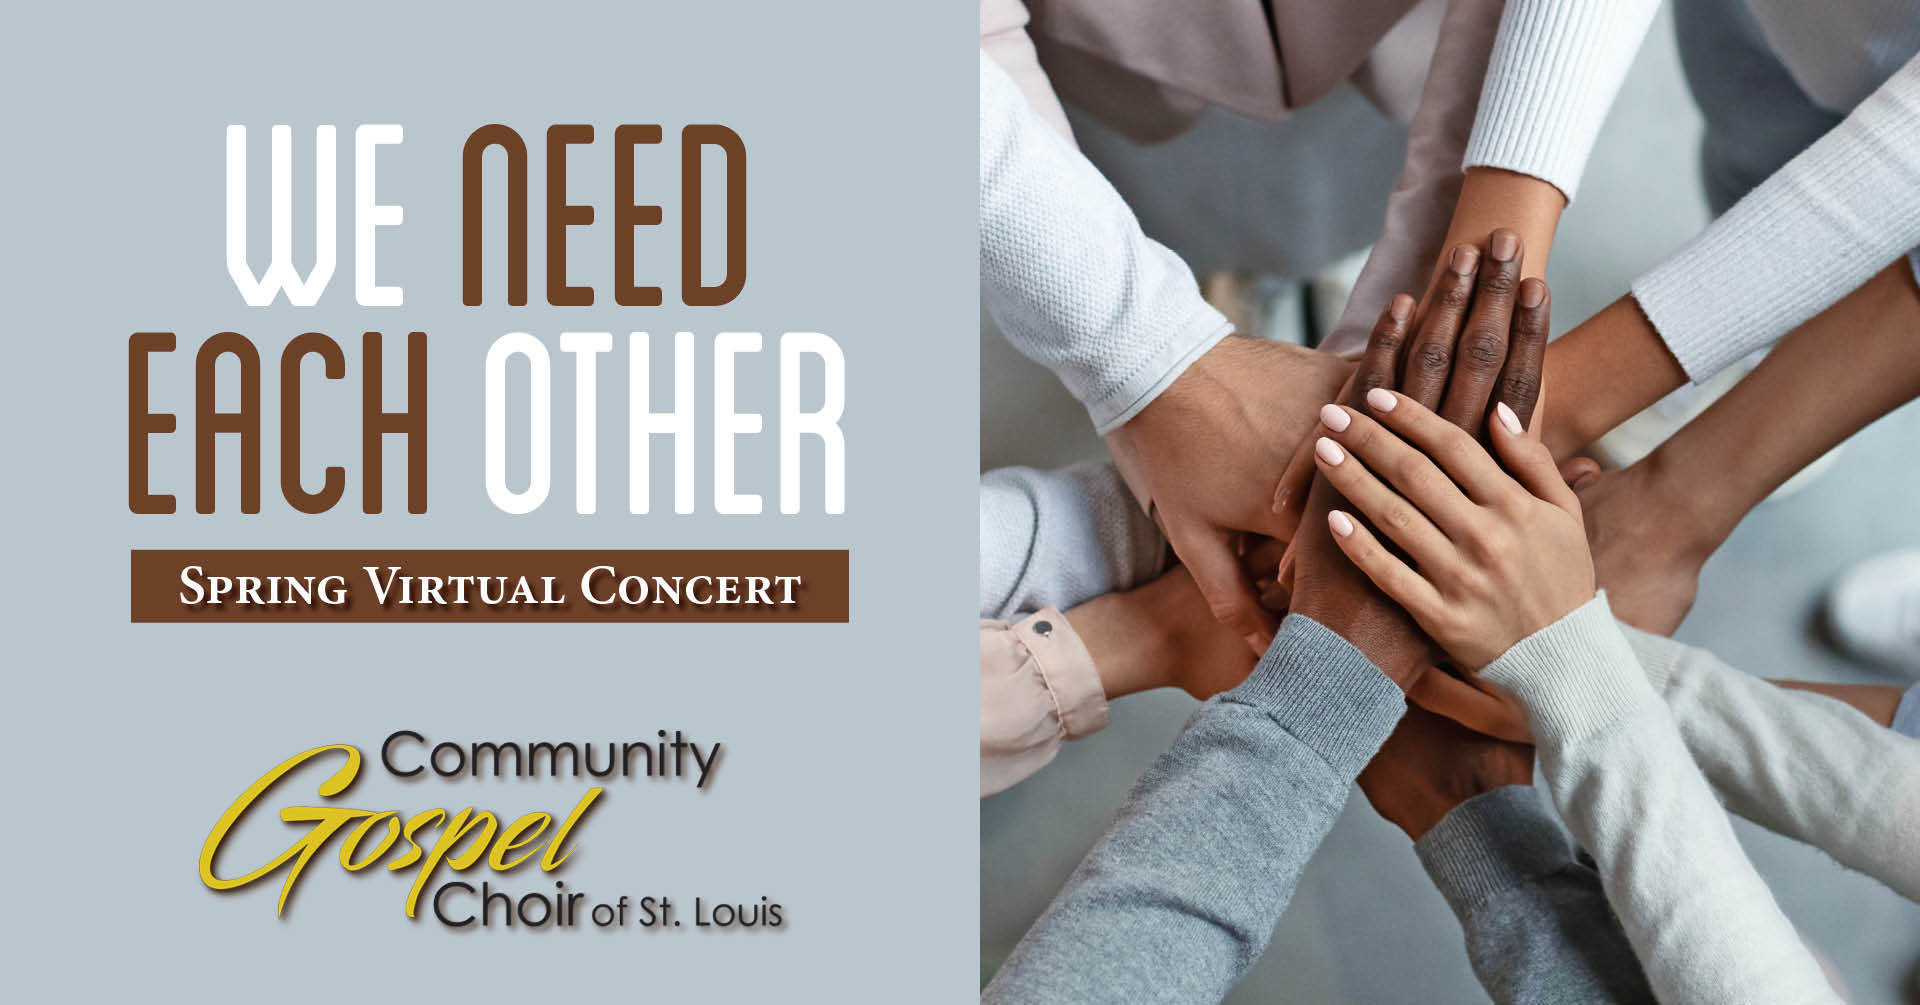 We Need Each Other -- Community Gospel Choir Spring Virtual Concert, Online, United States